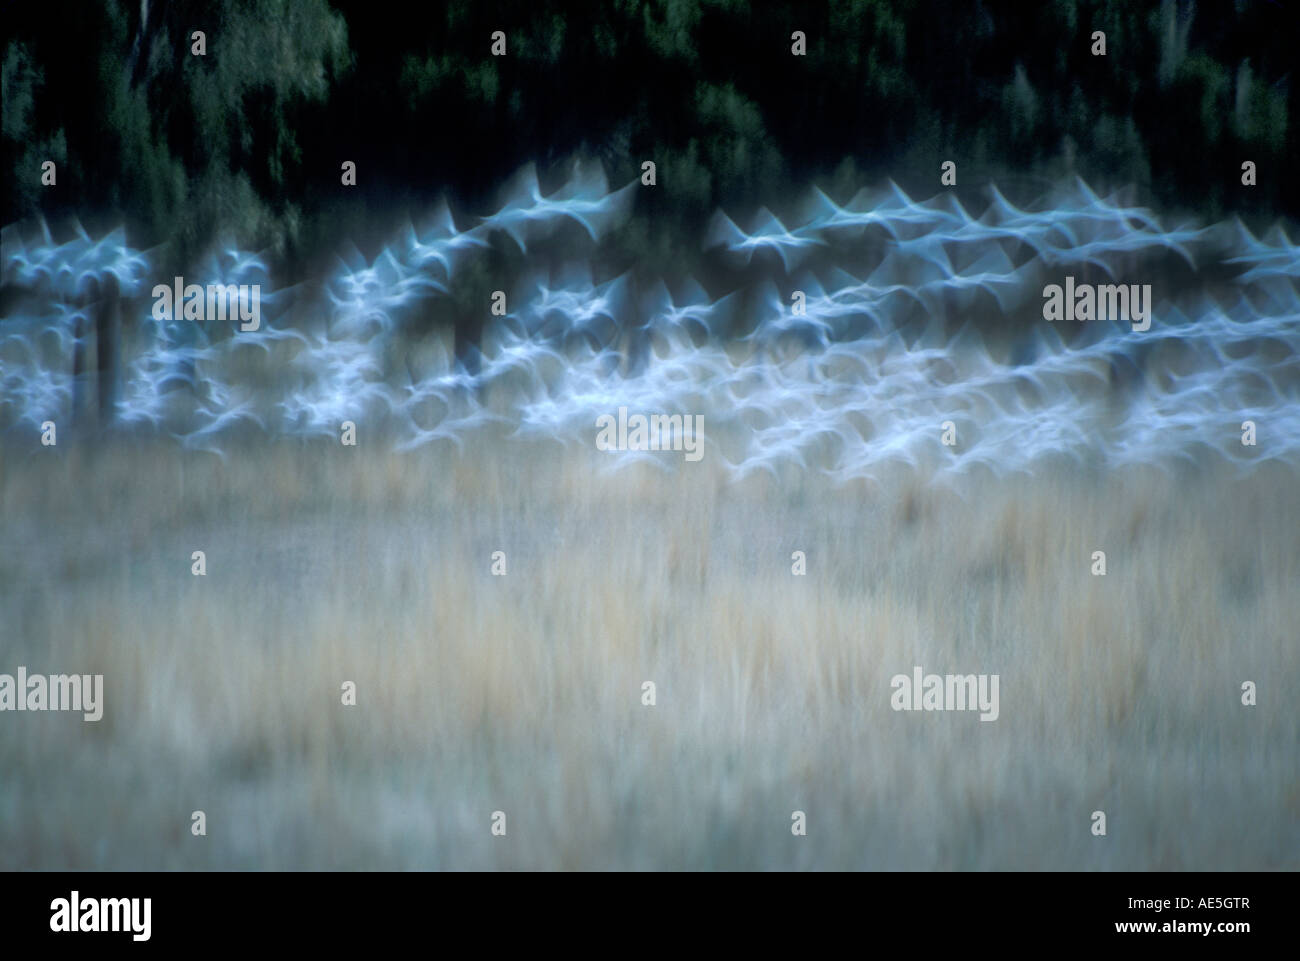 Flock of white birds flying across a field in a blur of motion Stock Photo